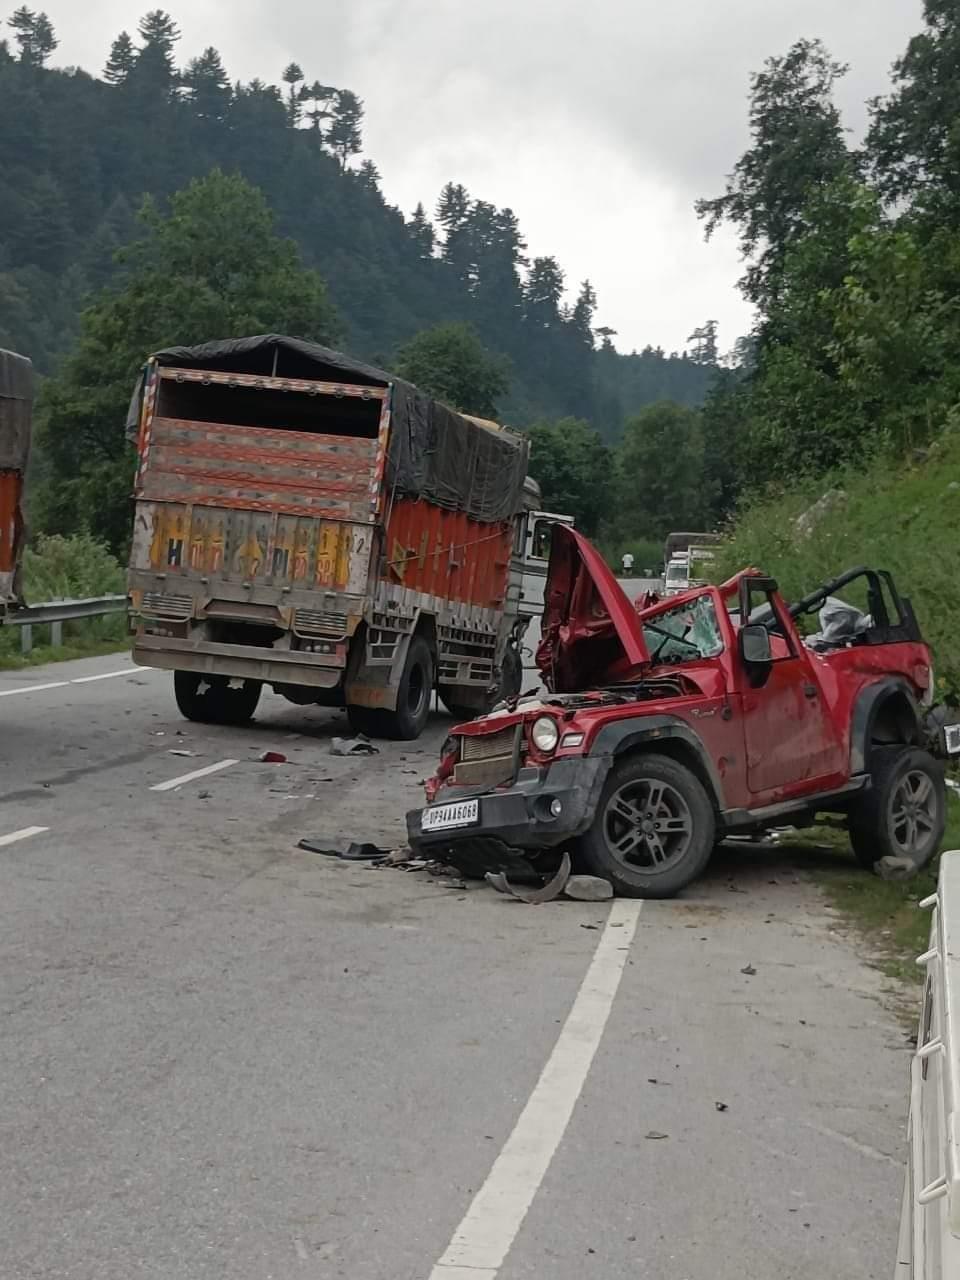 Newly wed couple from UP among 4 dead in 3 road accidents in Mandi and Manali